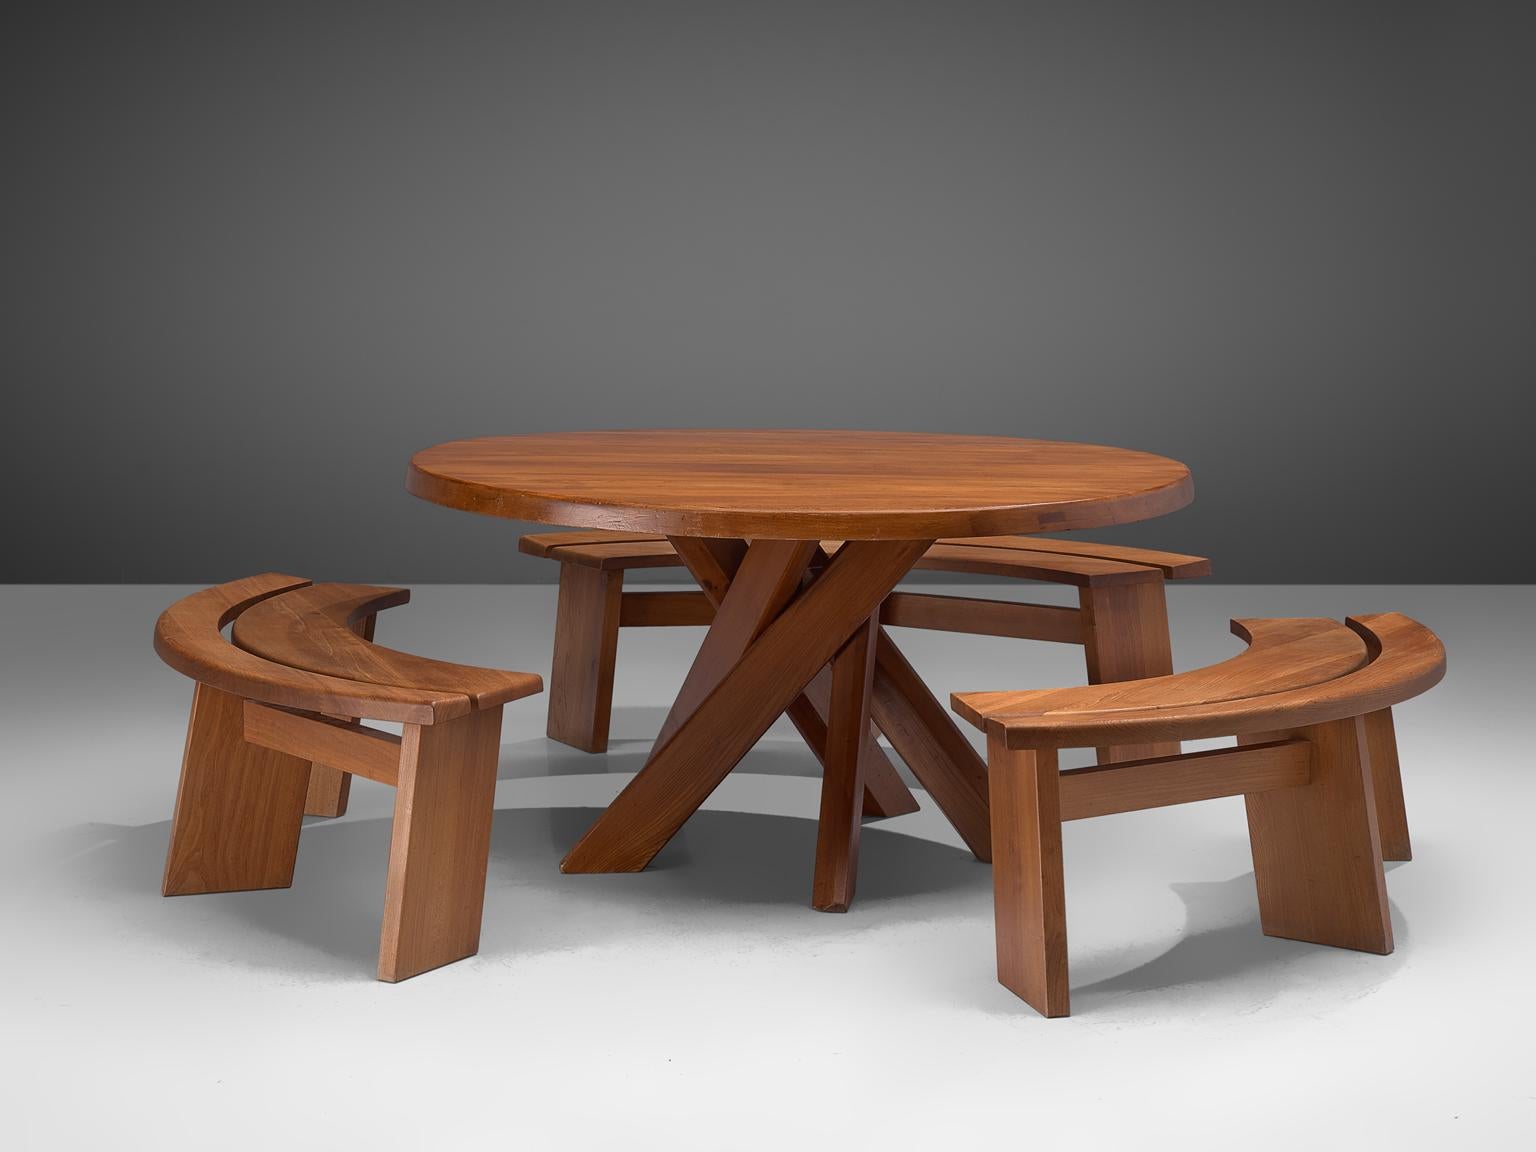 Pierre Chapo, Two benches and round pedestal table, solid elmwood, France, 1960s.

Very well crafted round pedestal T21D table and 3 quarter round S38 benches, all in good condition. The basic design and constructions, as well as the use of solid